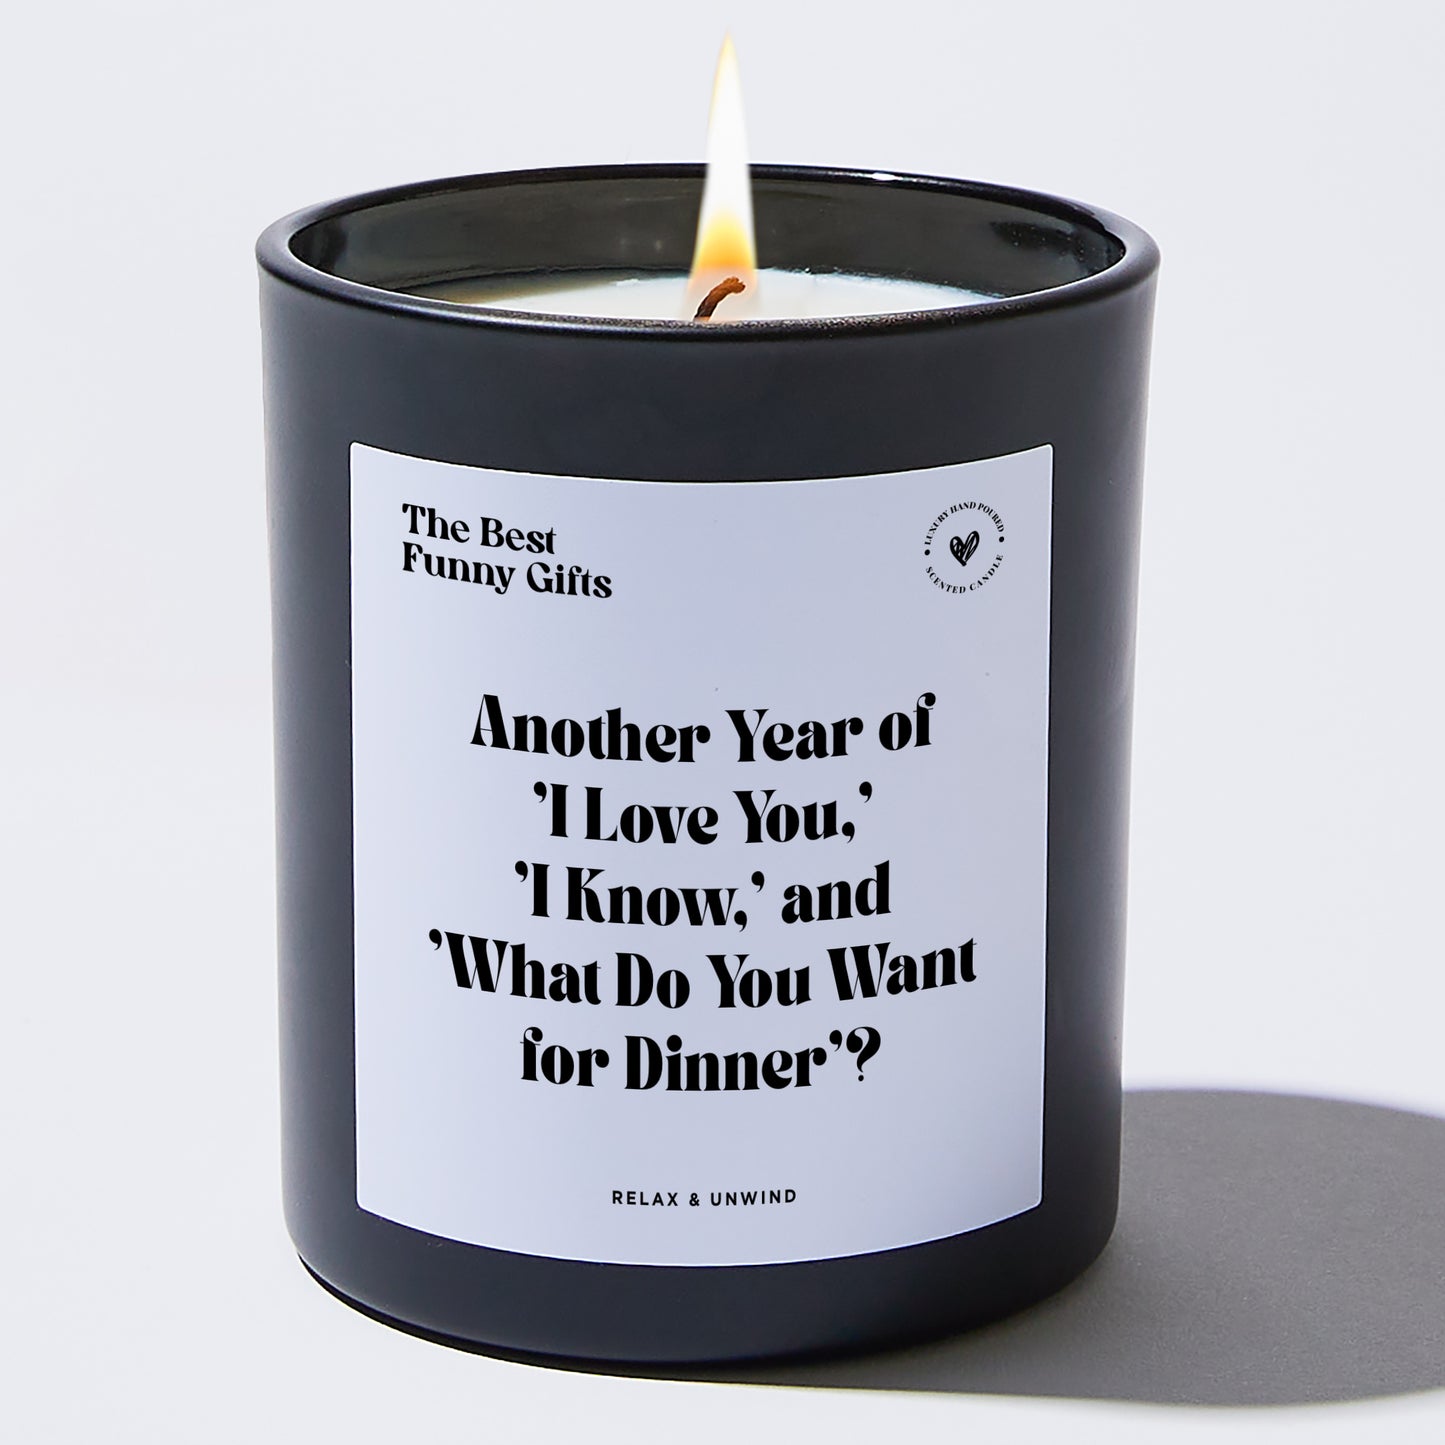 Anniversary Another Year of 'I Love You,' 'I Know,' and 'What Do You Want for Dinner? - The Best Funny Gifts